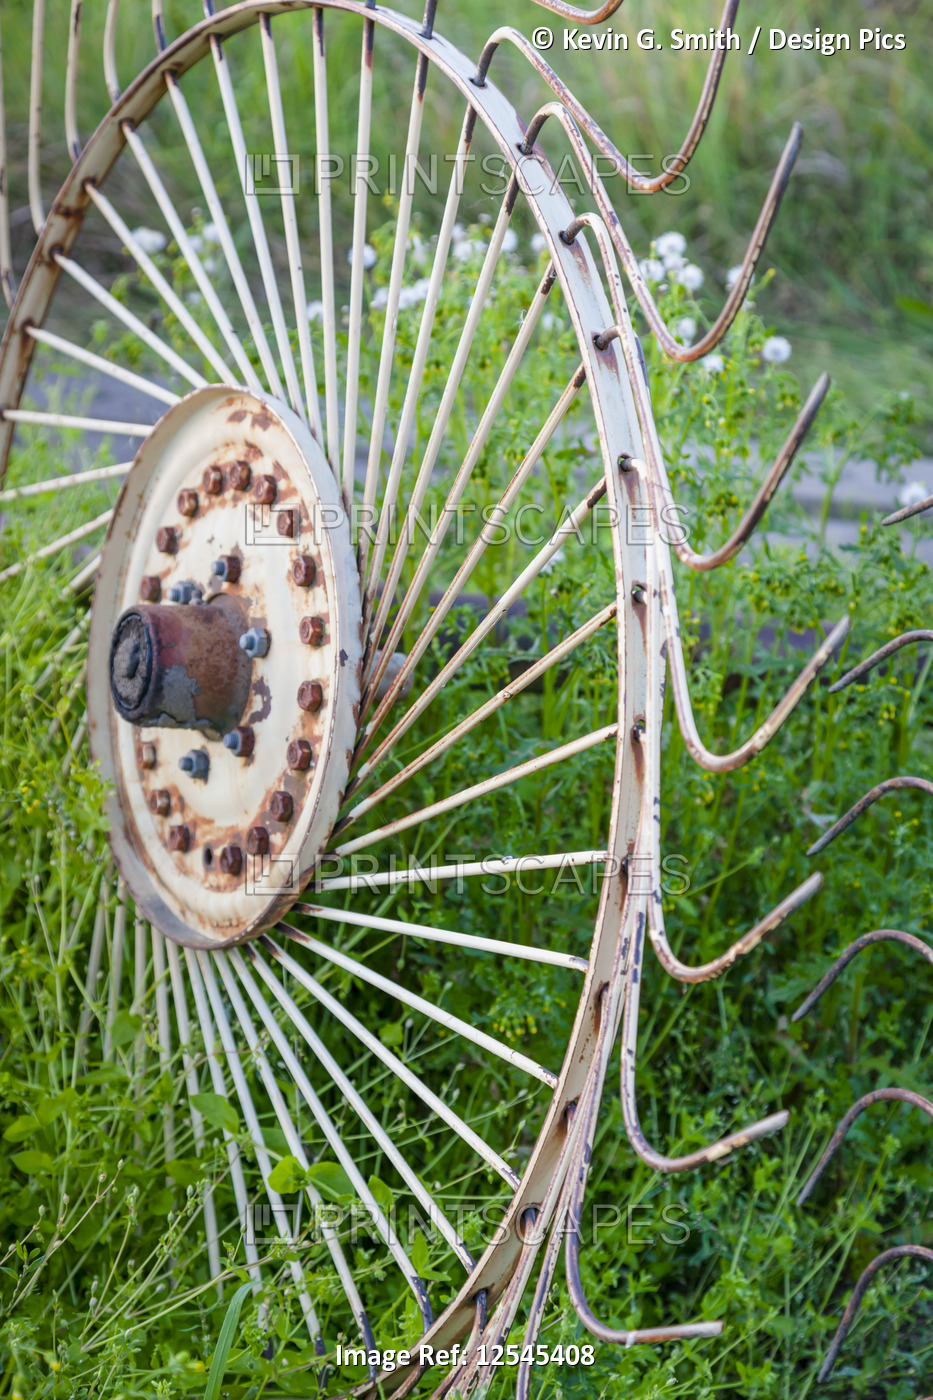 A large rusty wheel with metal spokes sits partially buried in a grass field; ...